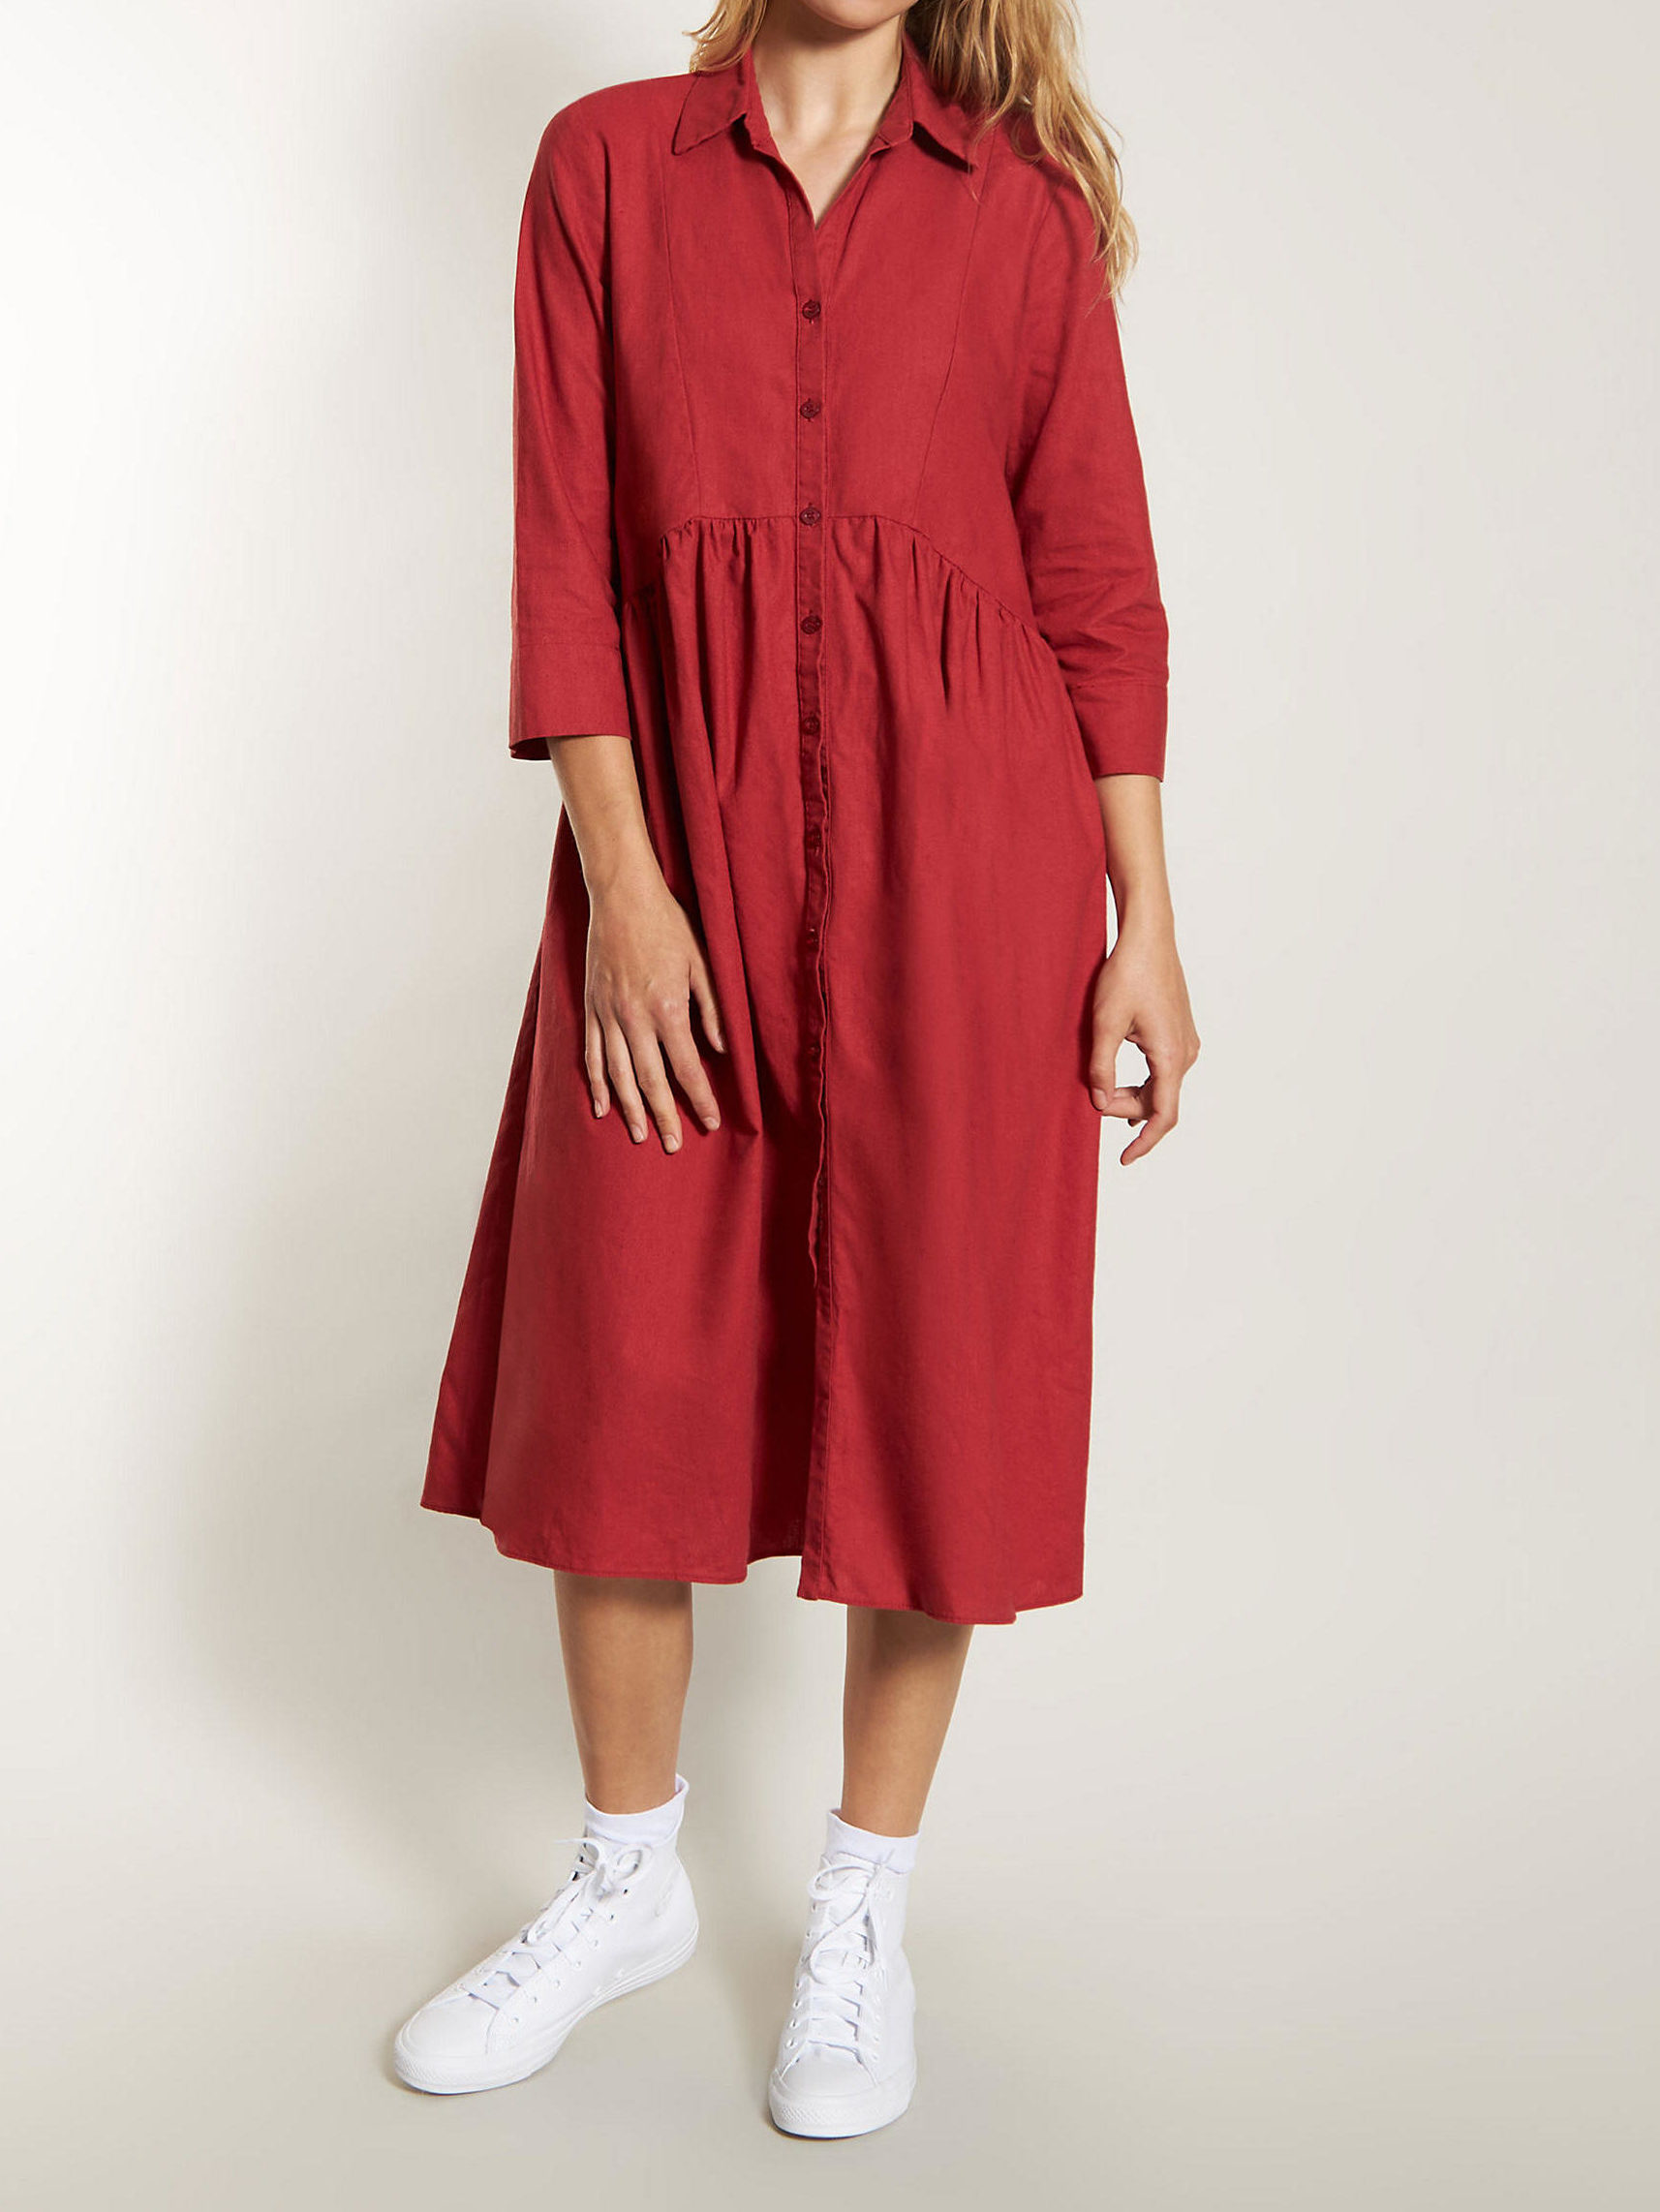 Oversized Red Organic Linen Blend Midi Shirtdress Made in Canada